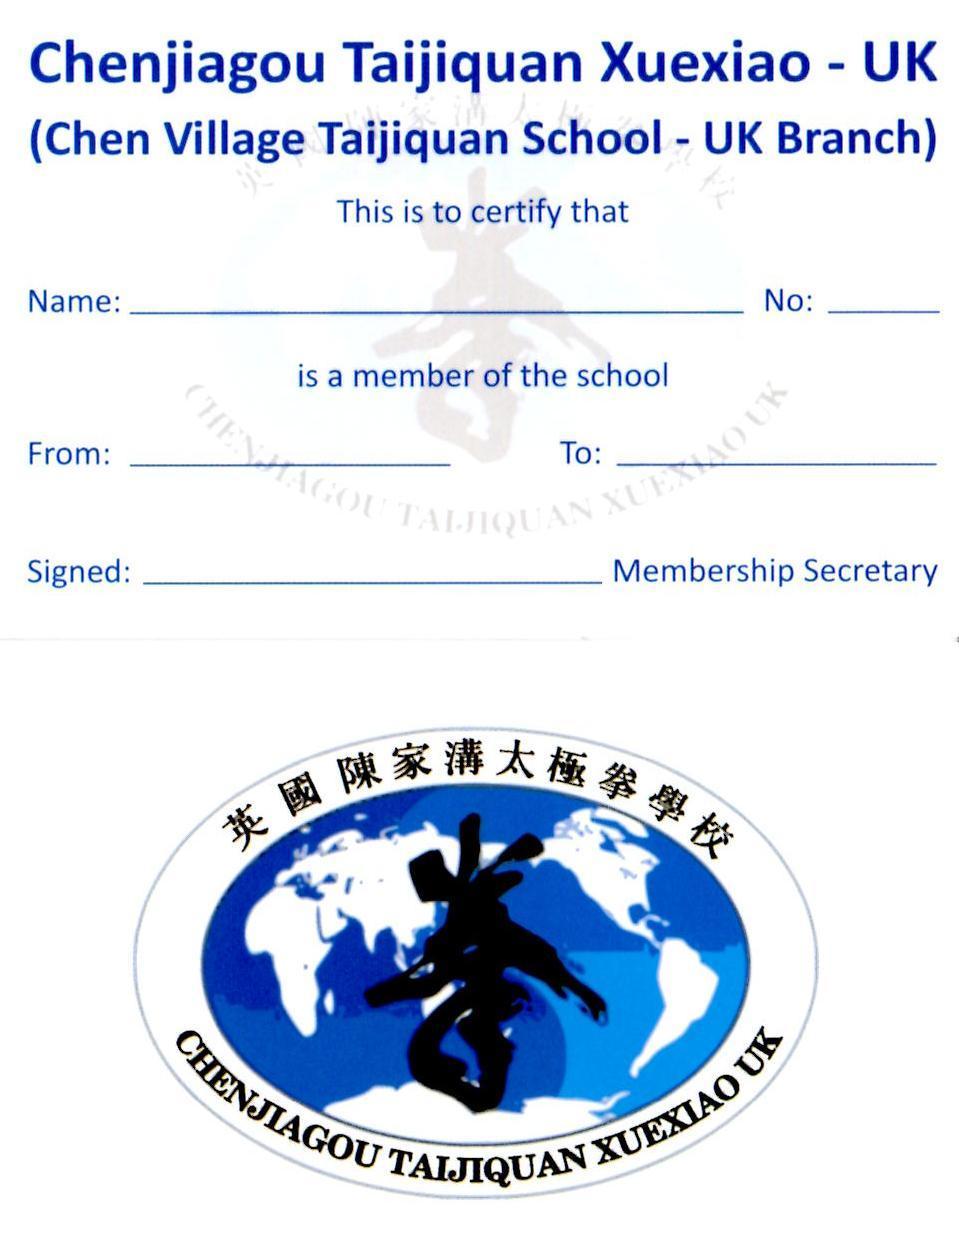 www.chentaijigb.co.uk Become a member of the Chenjiagou Taijiquan School Page 10 of 10 Our school is now the official UK branch of the Chenjiagou Taijiquan School.